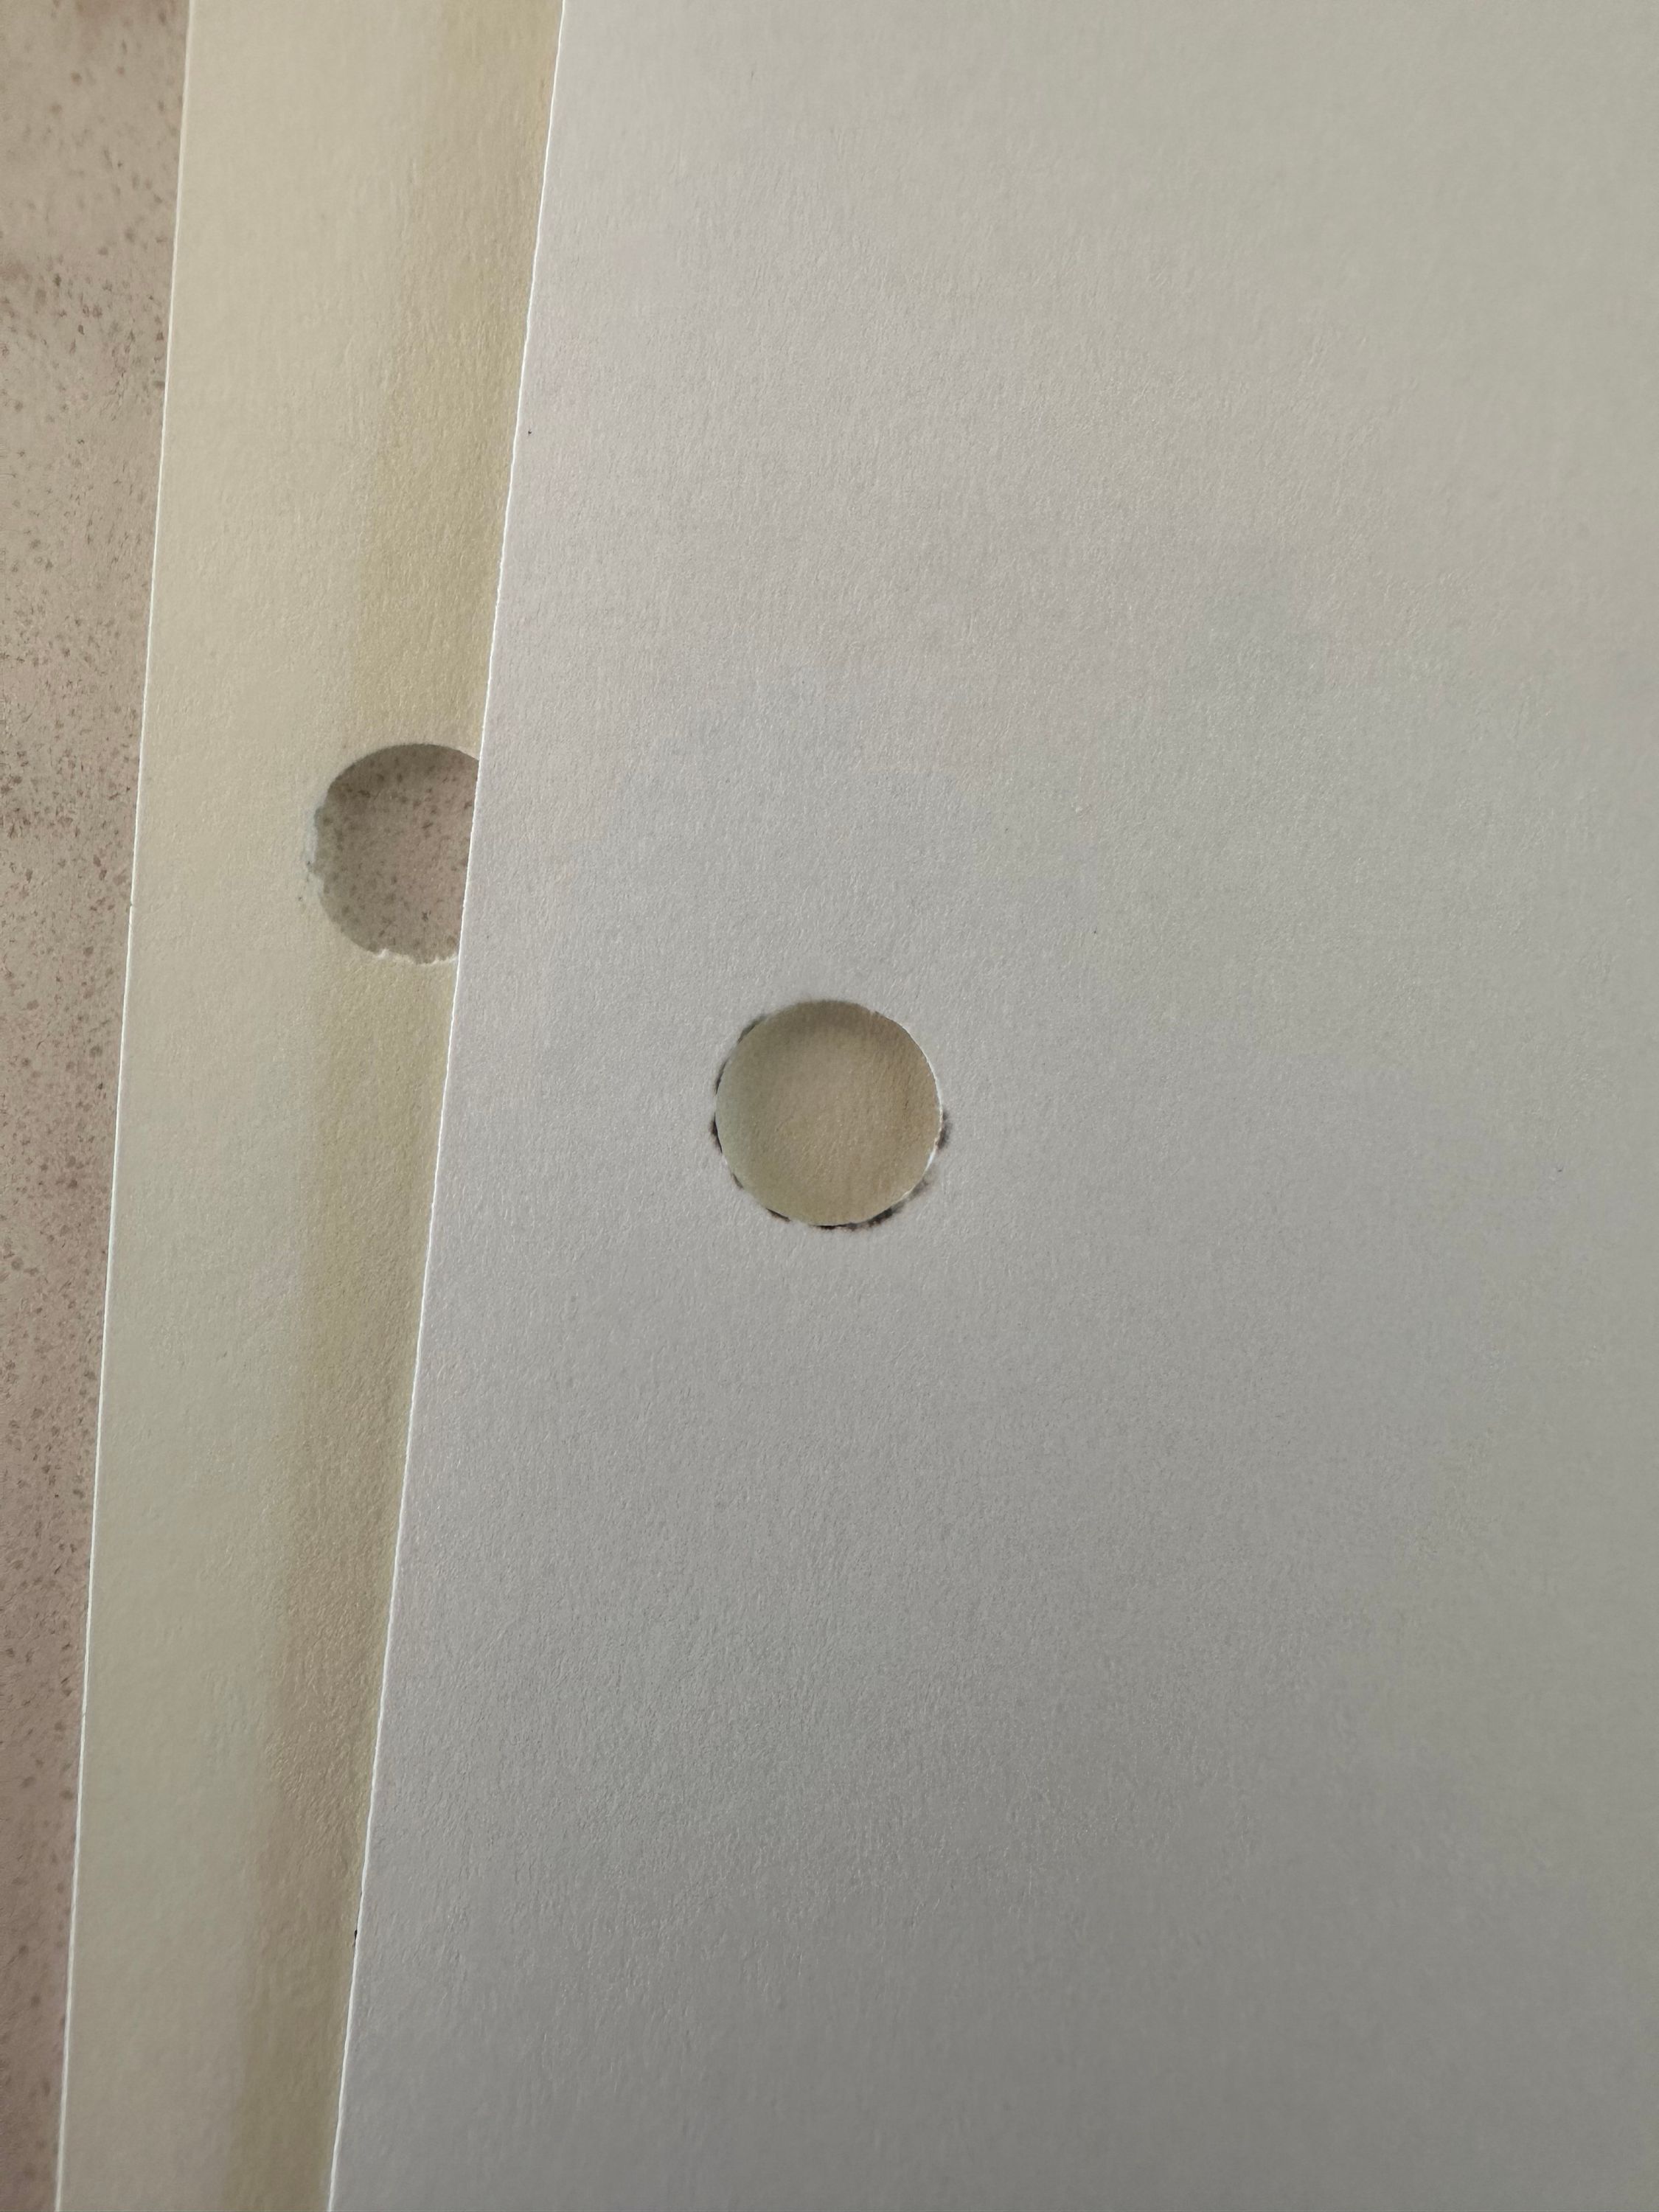 Dirty residue around the hole punch